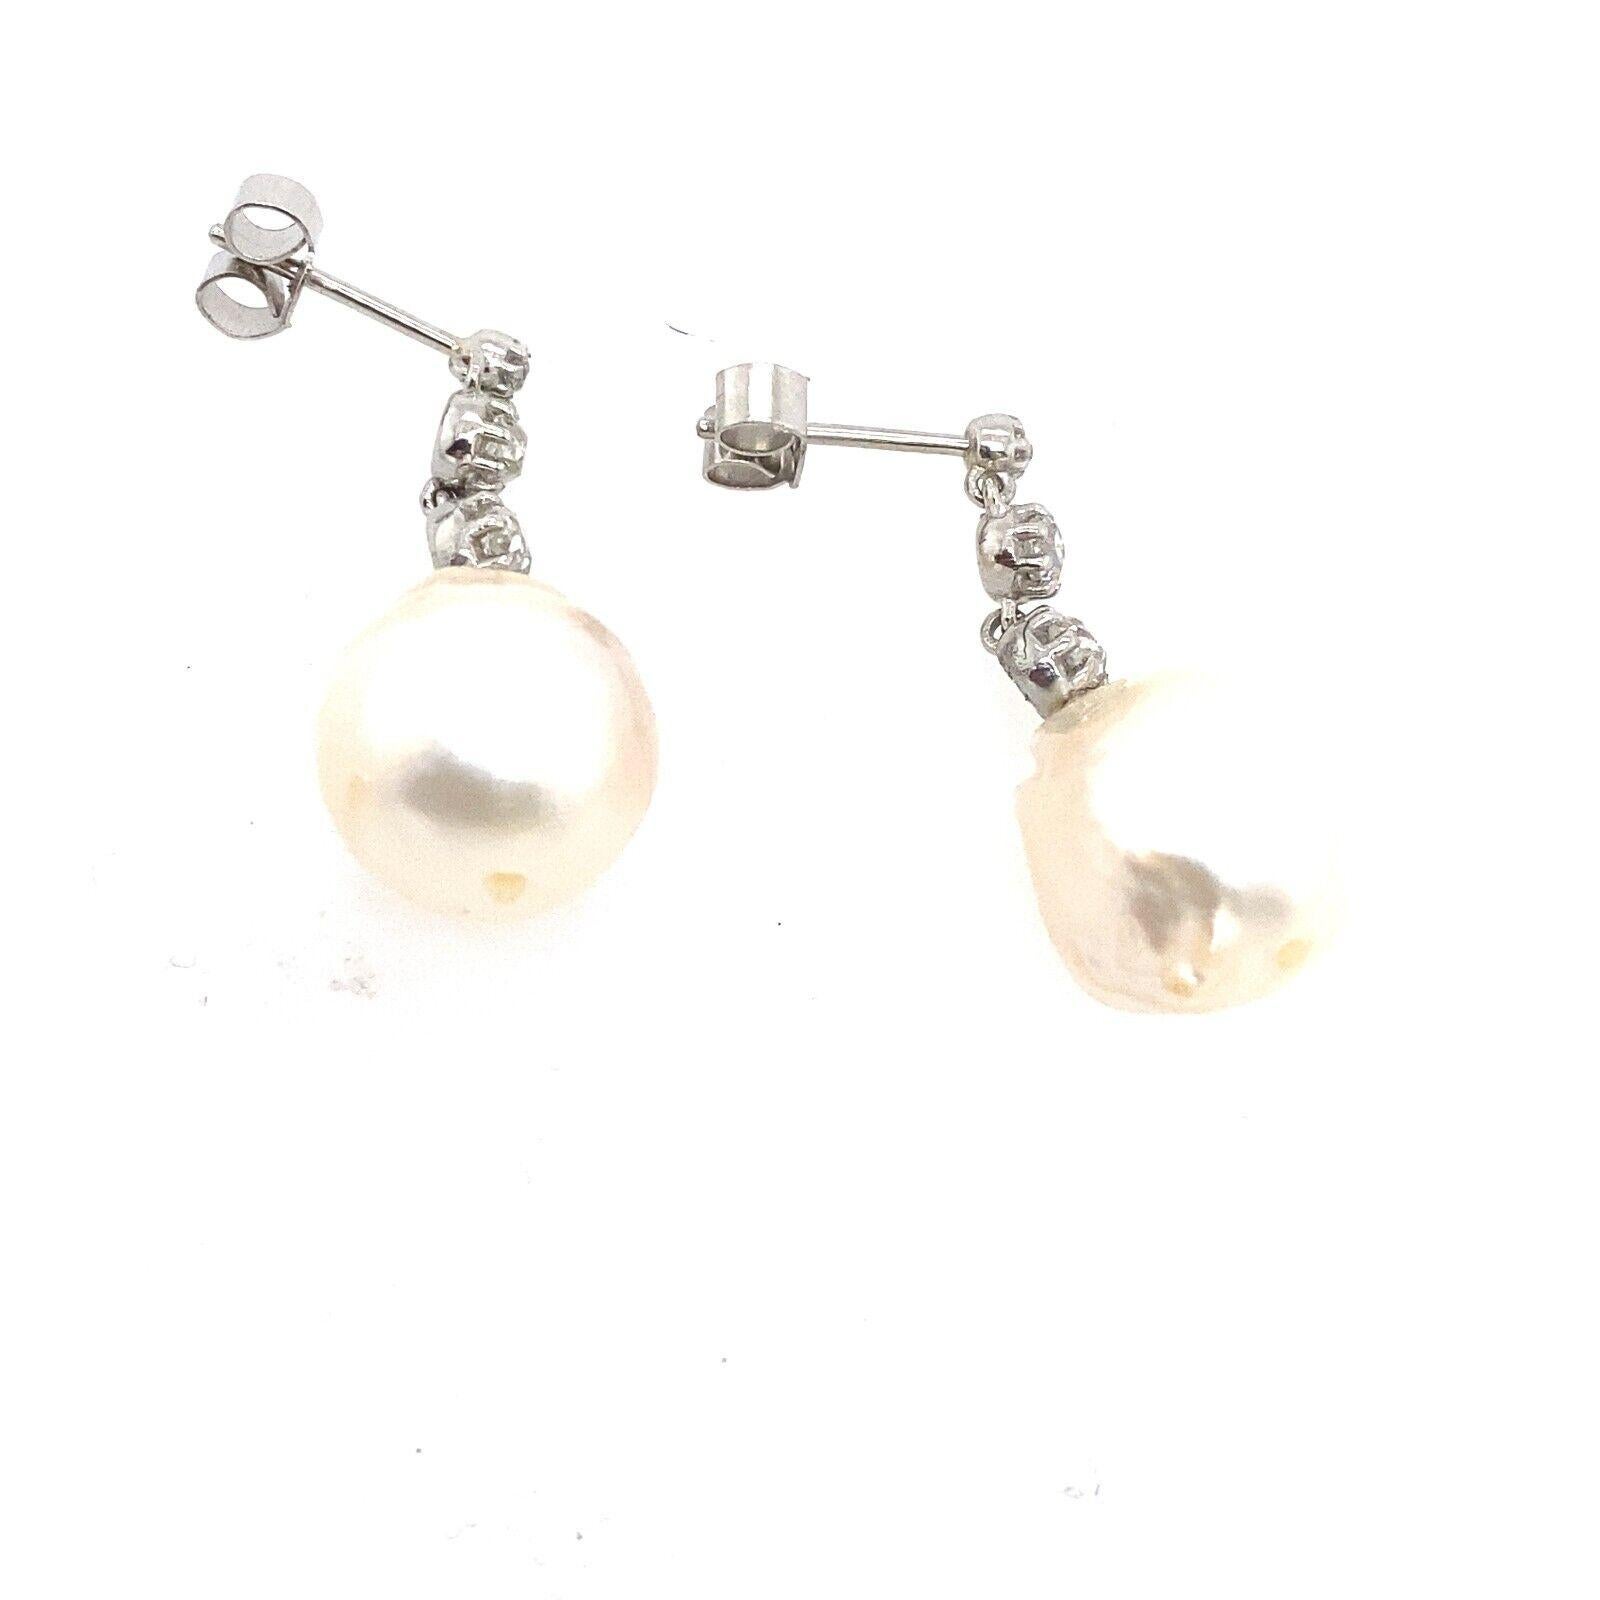 This is a pair of Victorian cut Diamond drop earrings set with 0.30ct Diamonds and 2 Cultured Pearls. 
This pair is a perfect choice for any occasion to wear as it is stylish and comfortable. It is crafted from Platinum with peg and butterfly